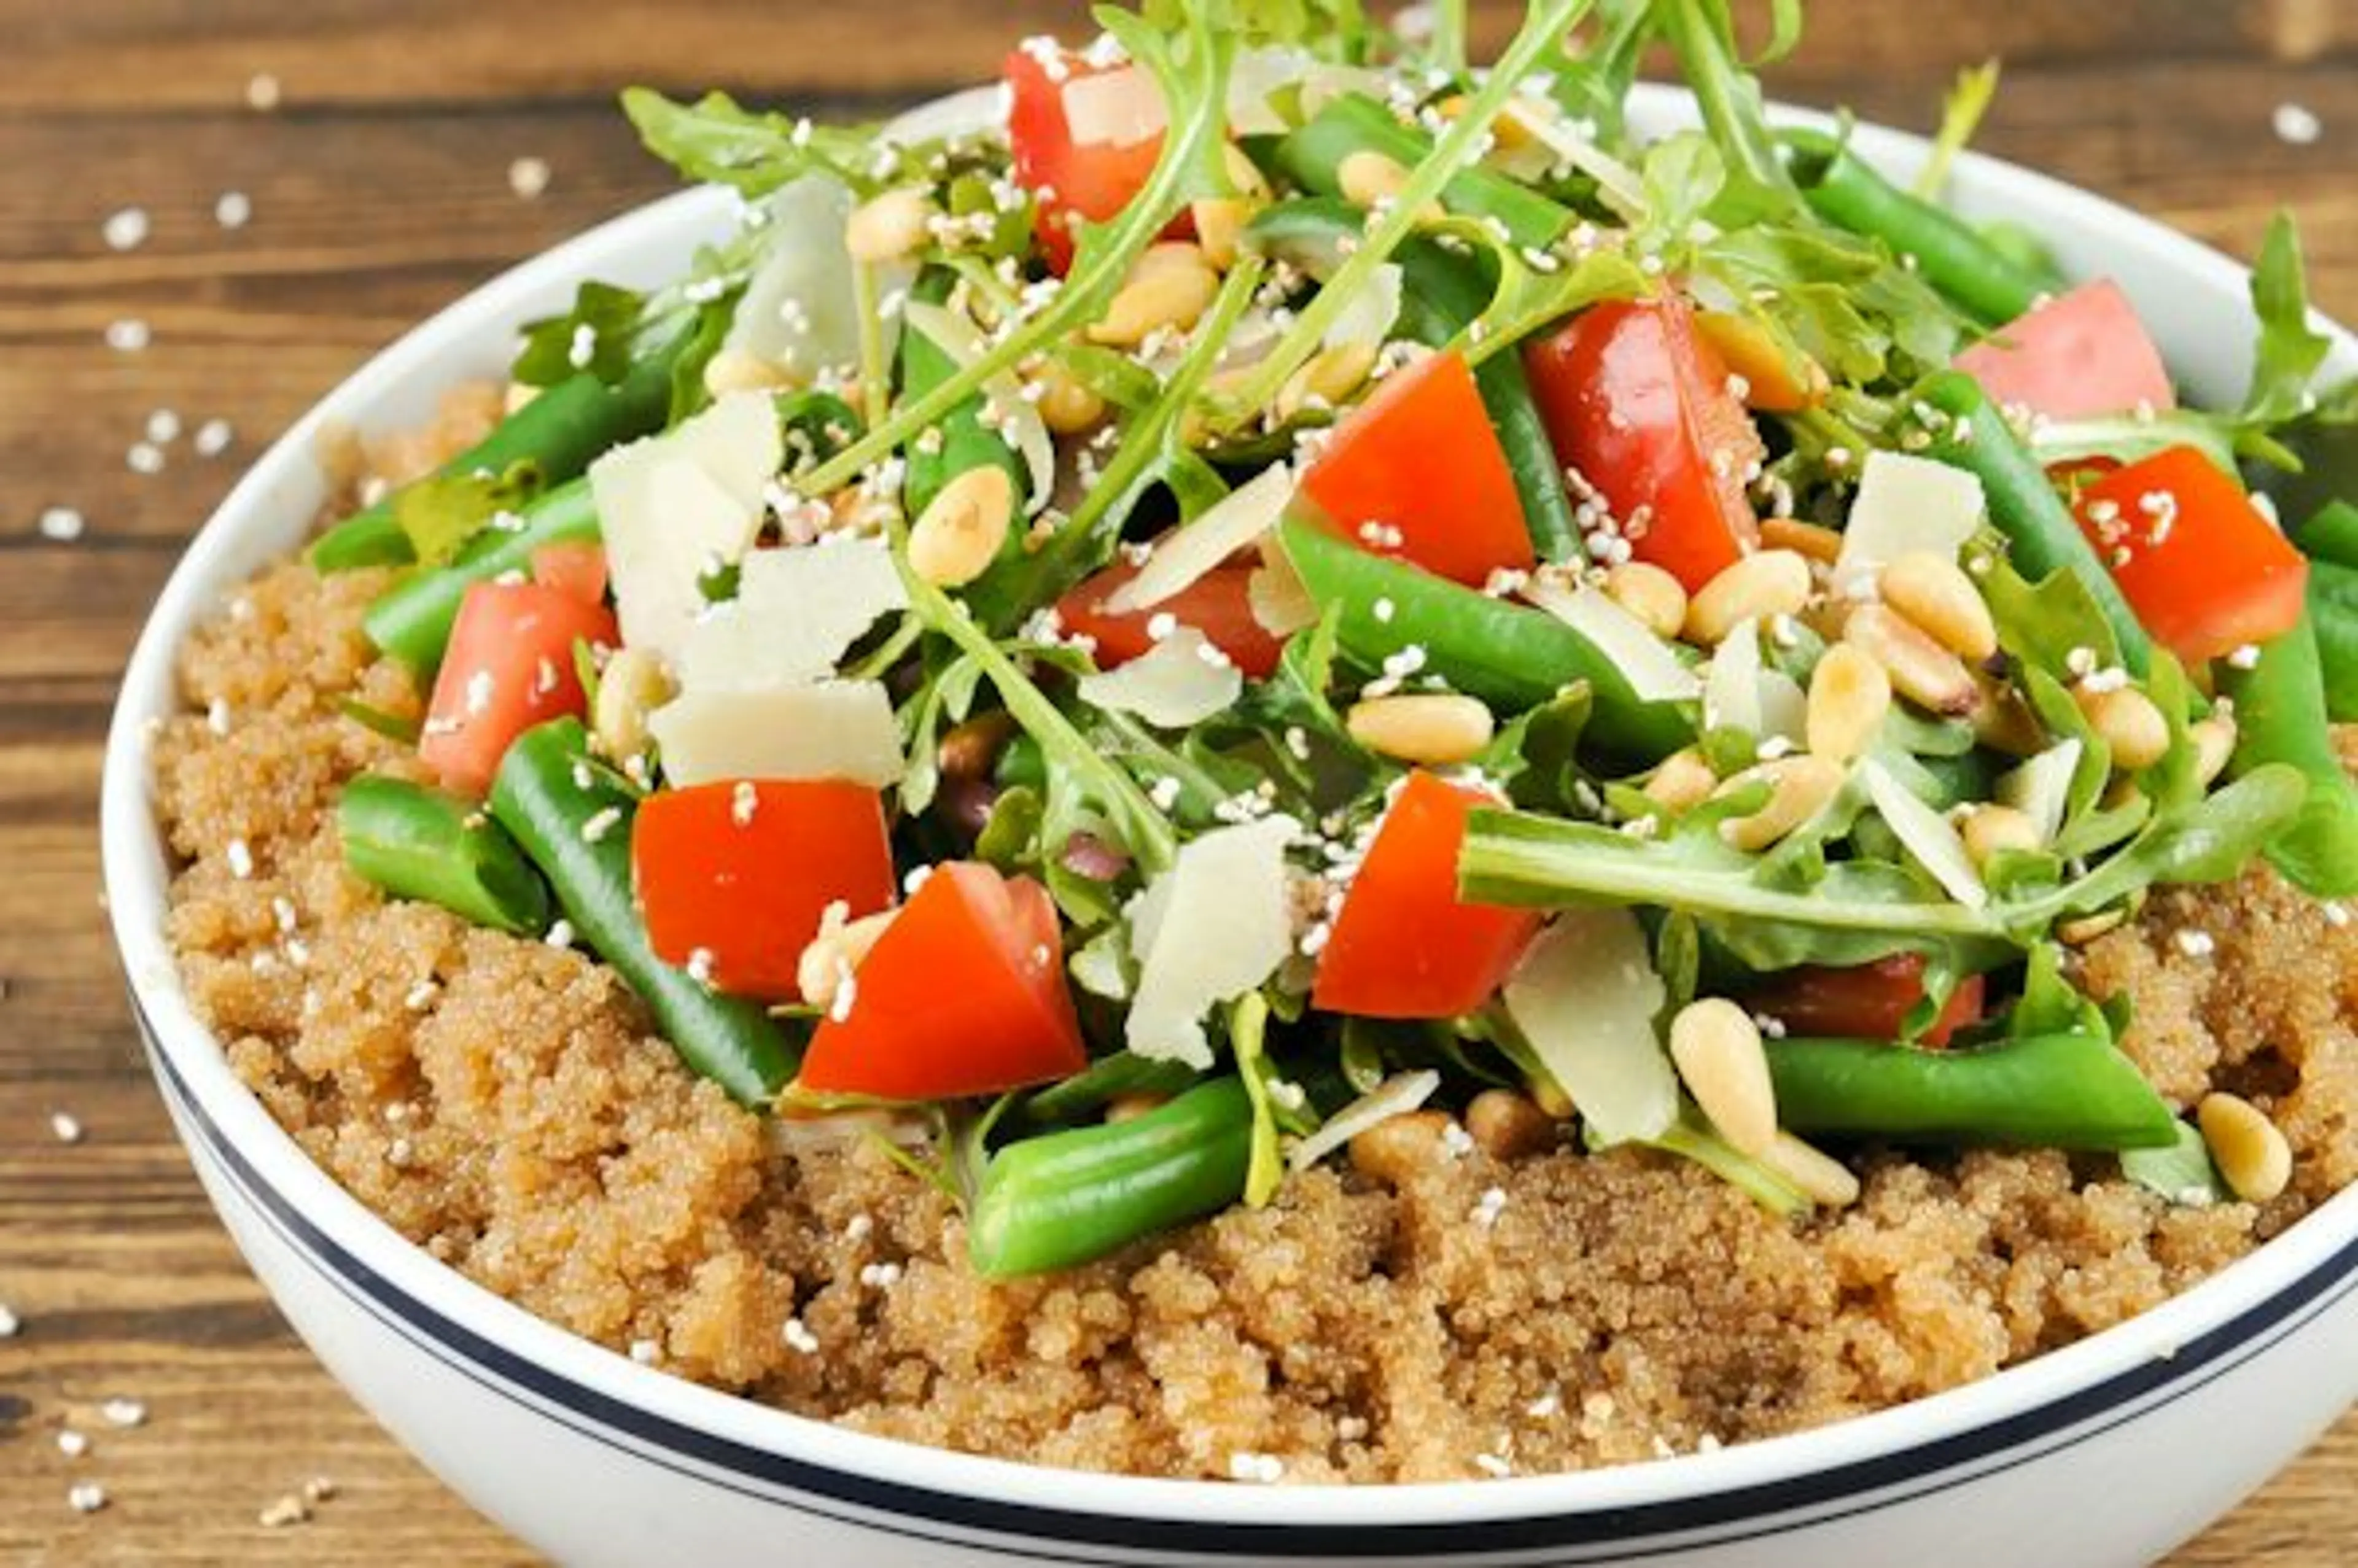 Amaranth Bowl with green beans, tomatoes, arugula, and Parme